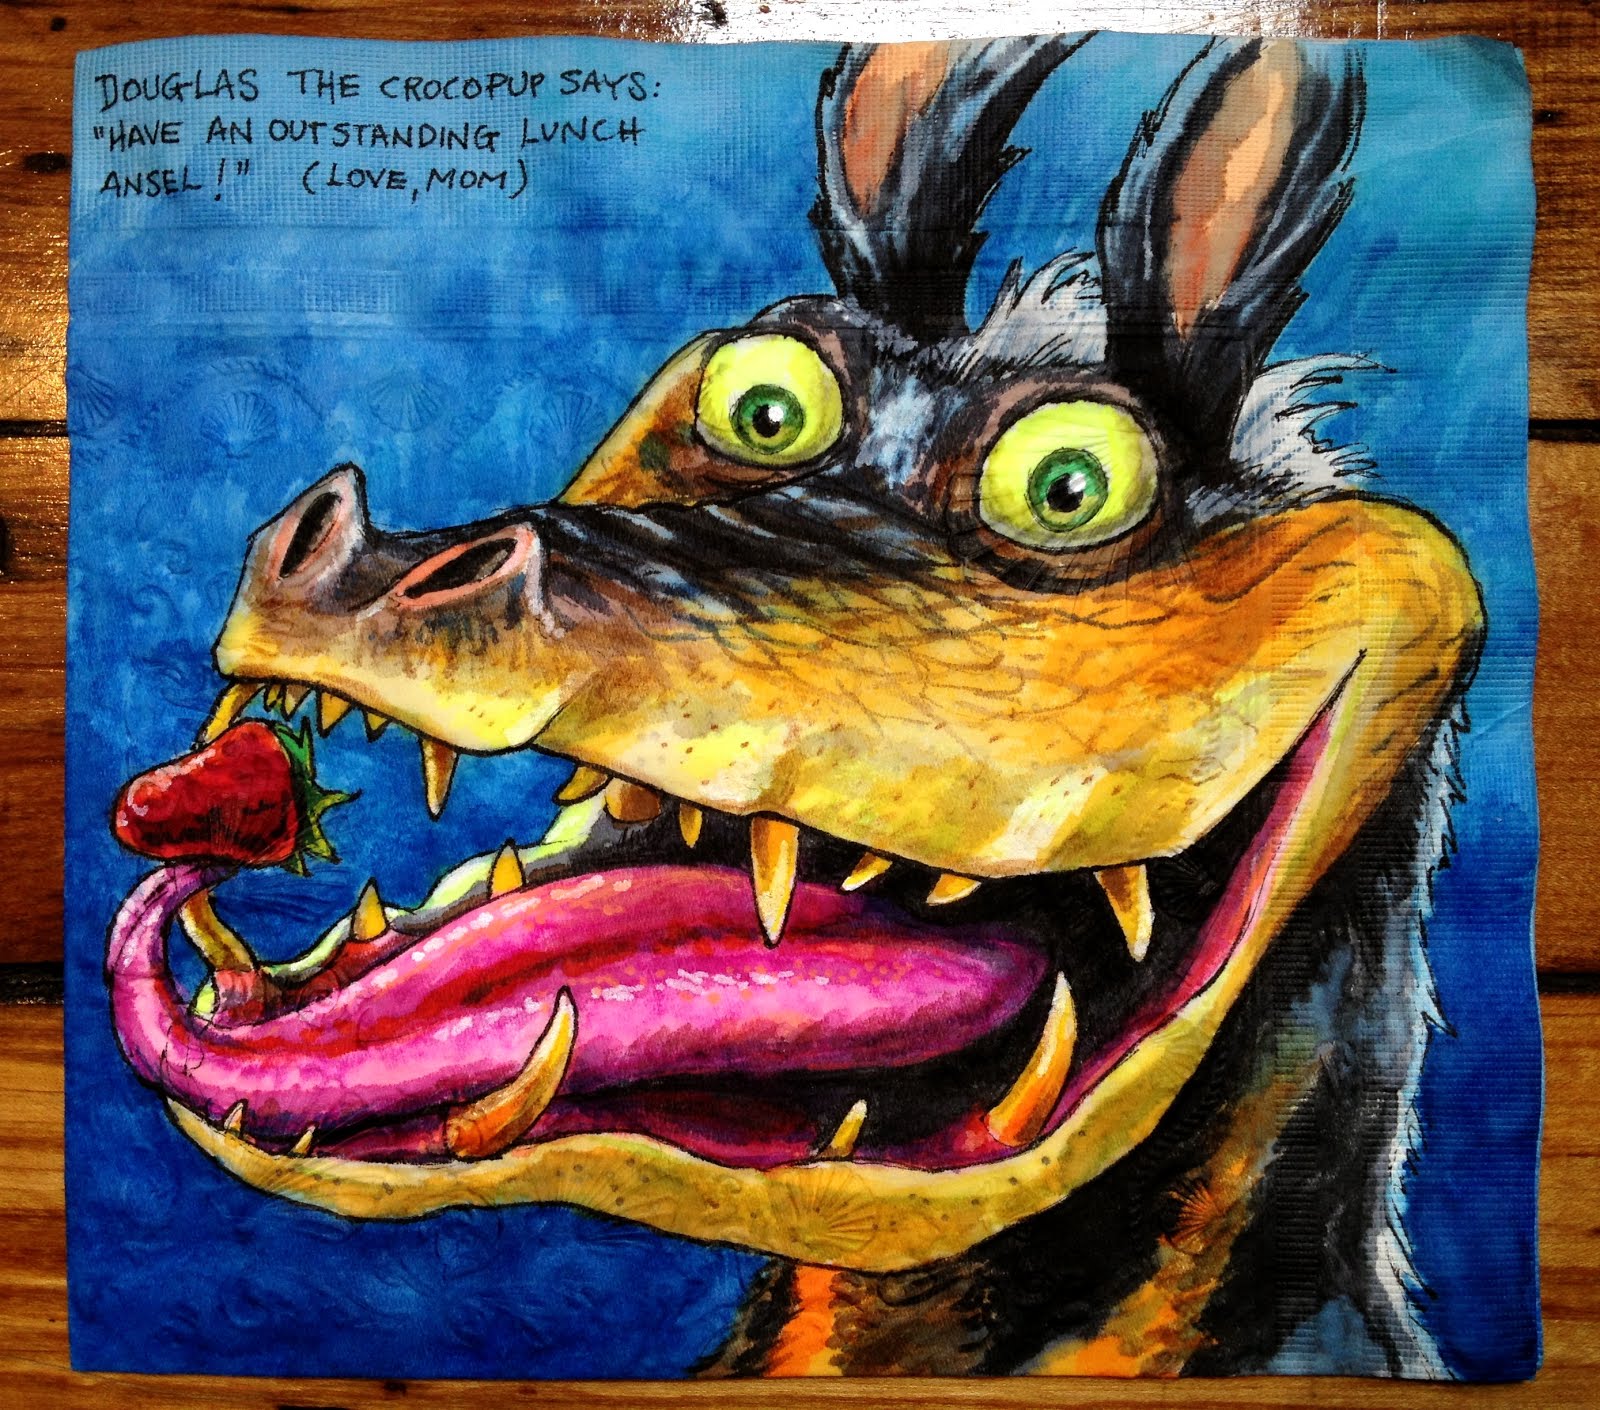 Art - Douglas The Croco Pup Says Have An Outstanding Lunch Ansel Love, Mom